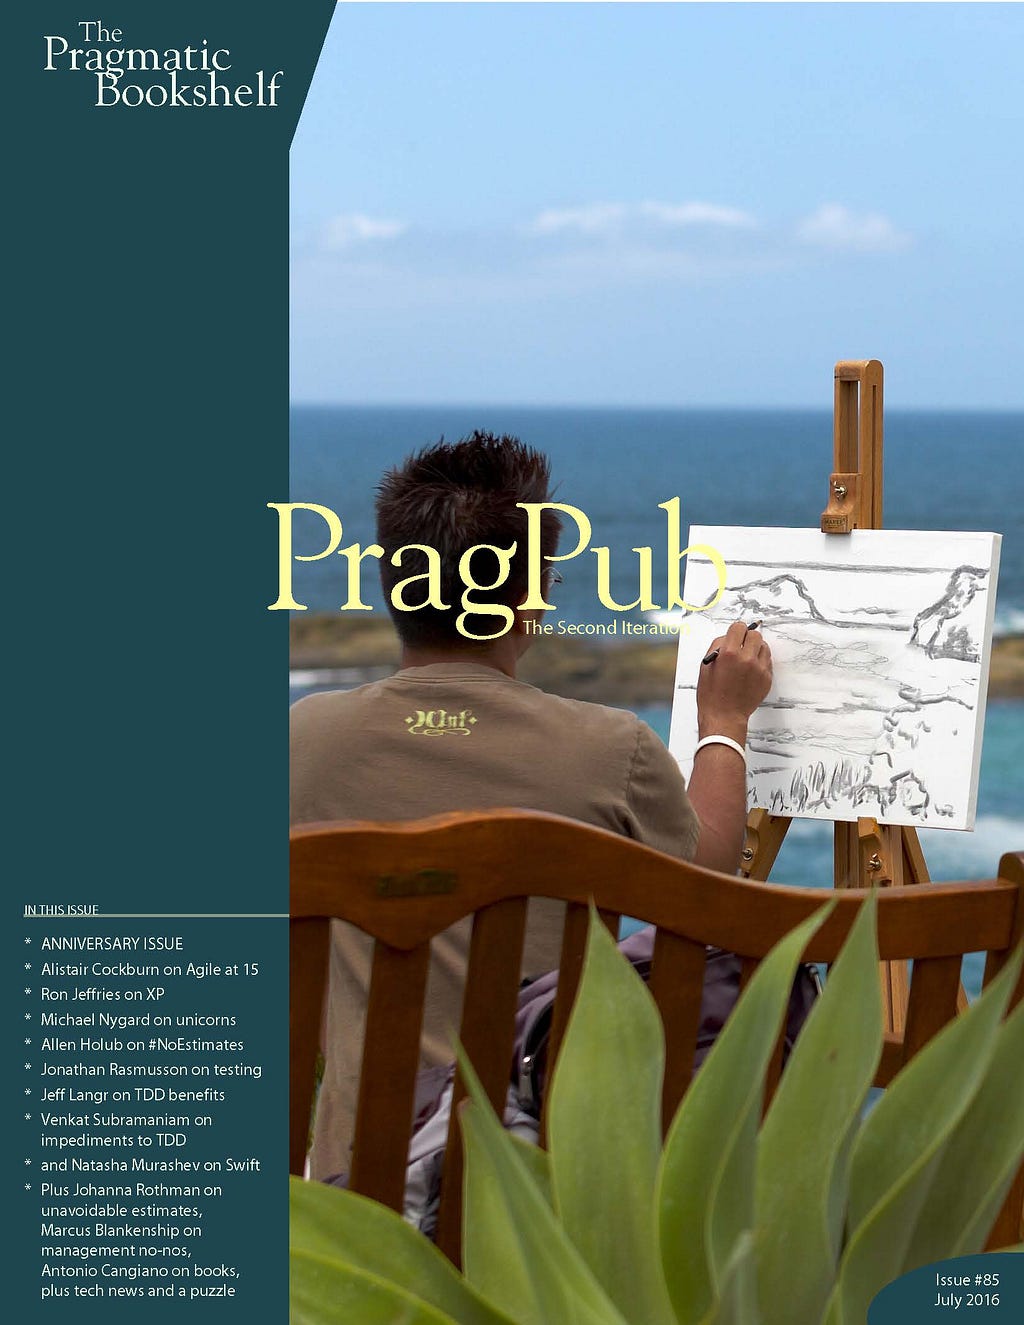 PragPub magazine cover featuring a man drawing a landscape with a body of water in the background